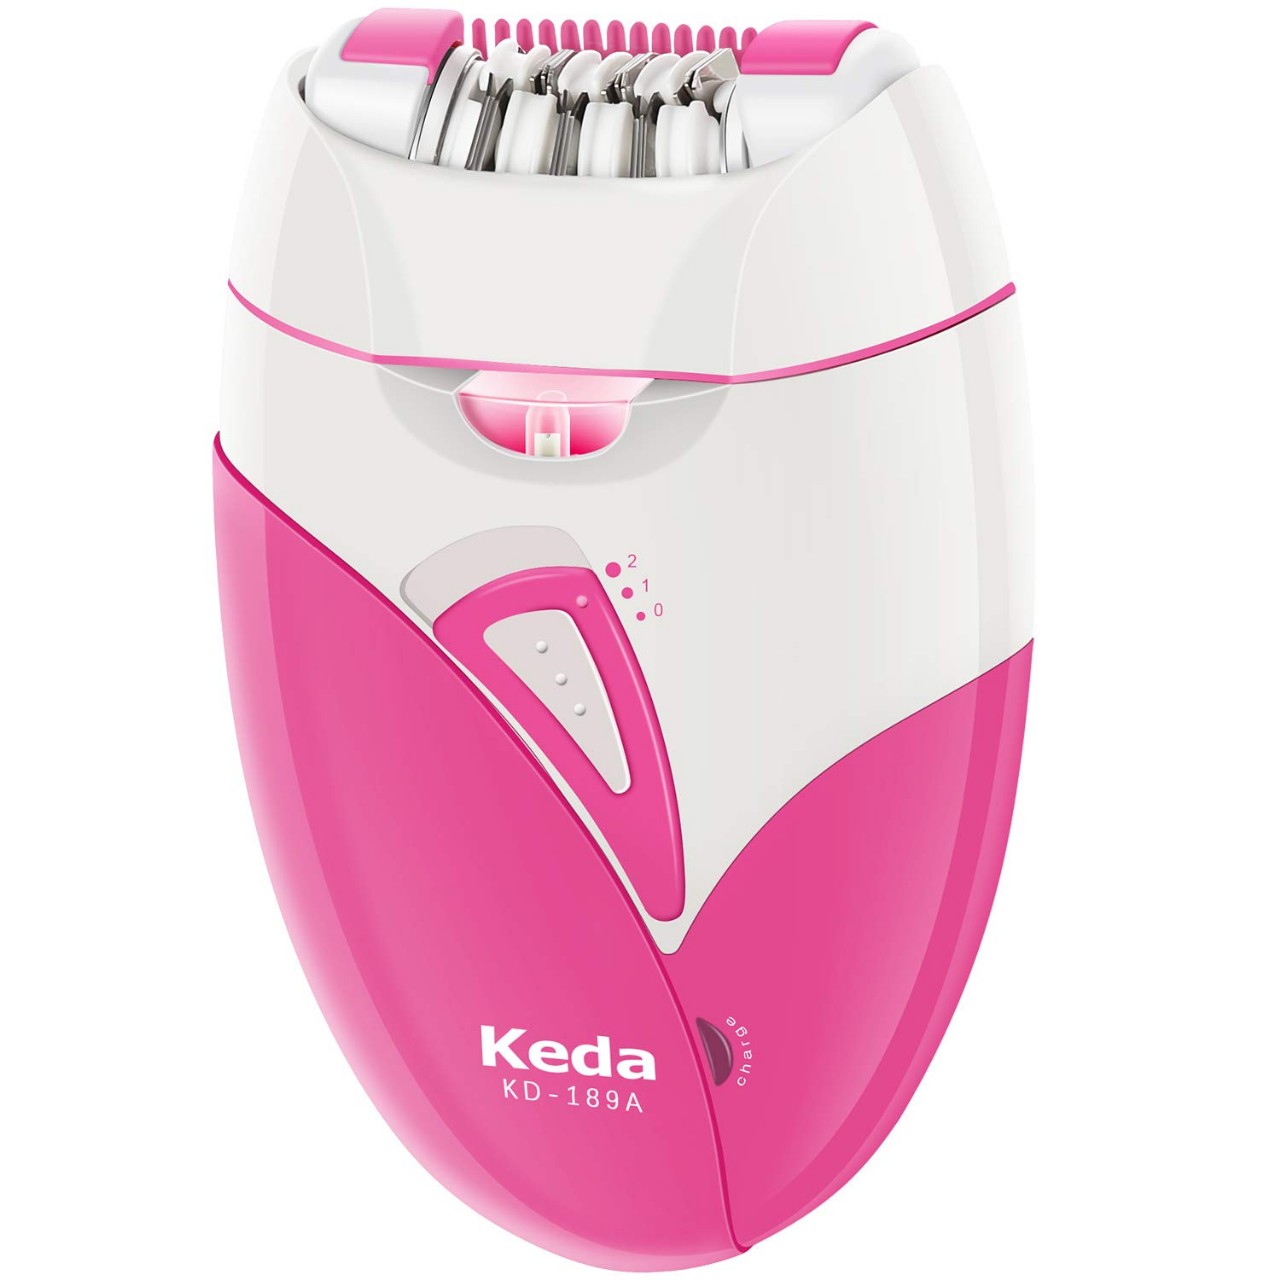 Hair Epilator Removal for Women - Cordless Women’s Epilator for Legs and Arms, Rechargeable Hair